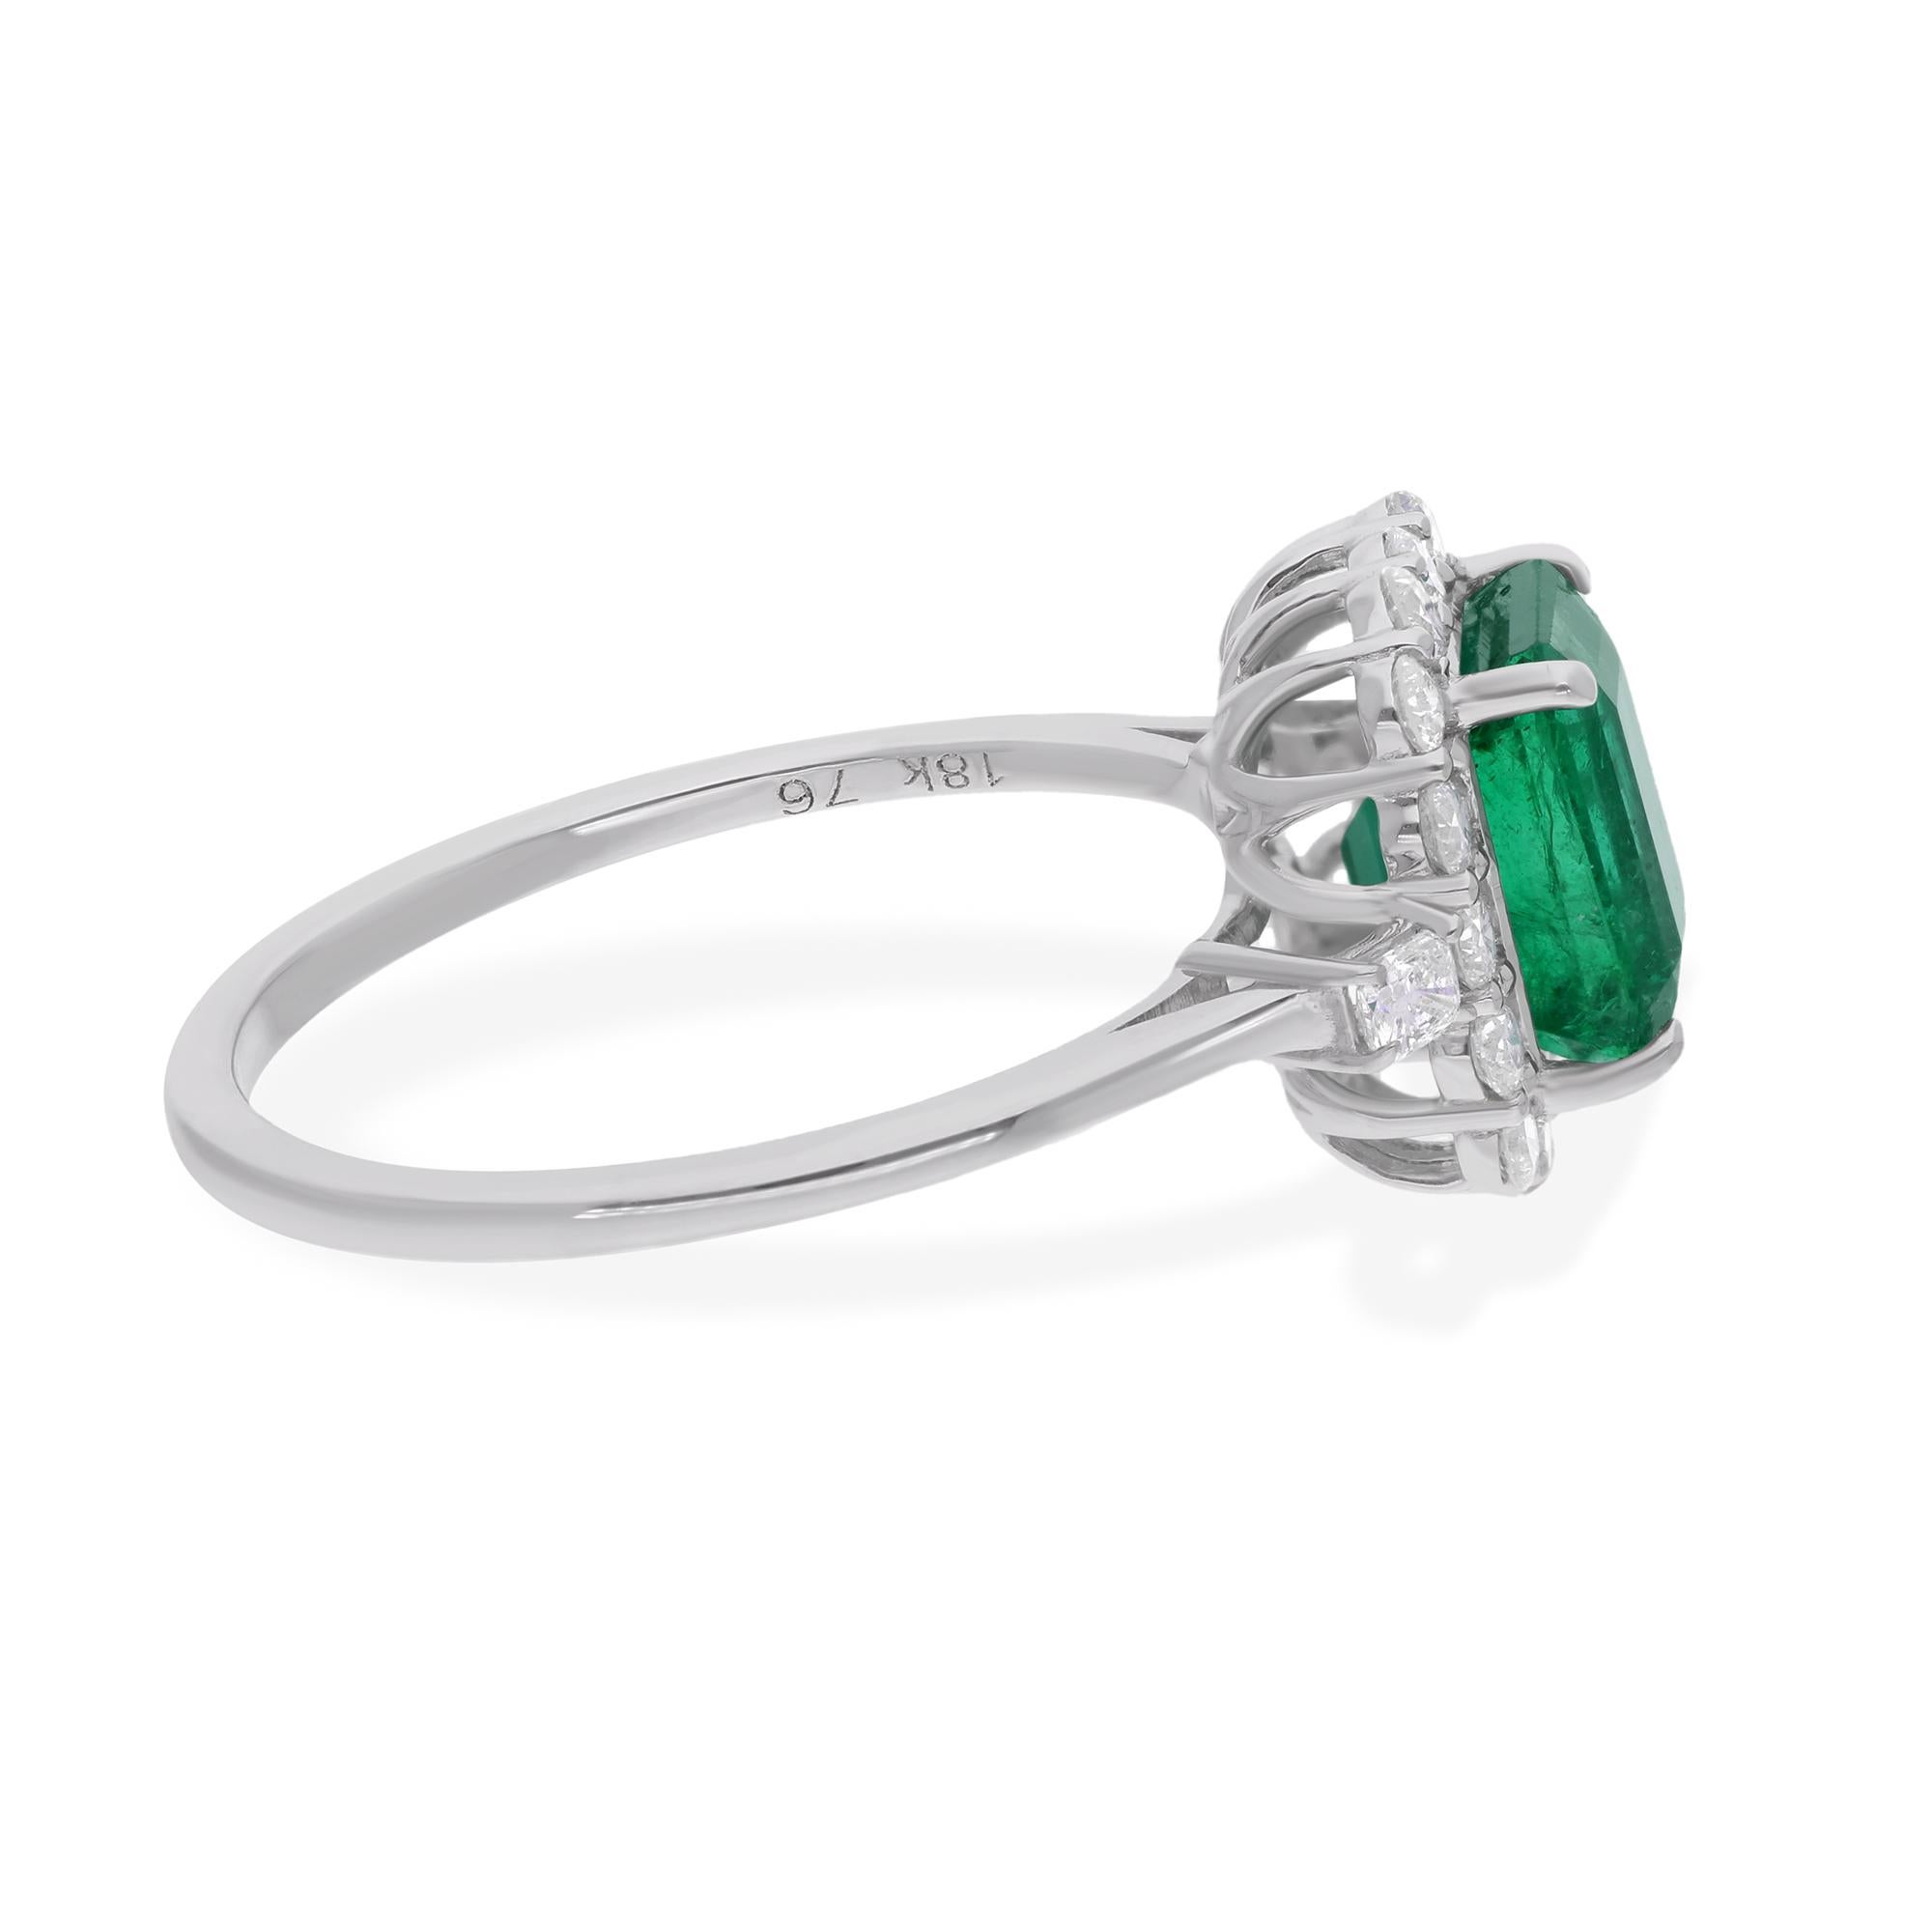 At its heart lies a stunning Zambian Emerald, renowned for its exceptional clarity and rich, verdant hue. Mined from the depths of Zambia's renowned emerald mines, this gemstone exudes a natural allure, evoking visions of lush landscapes and